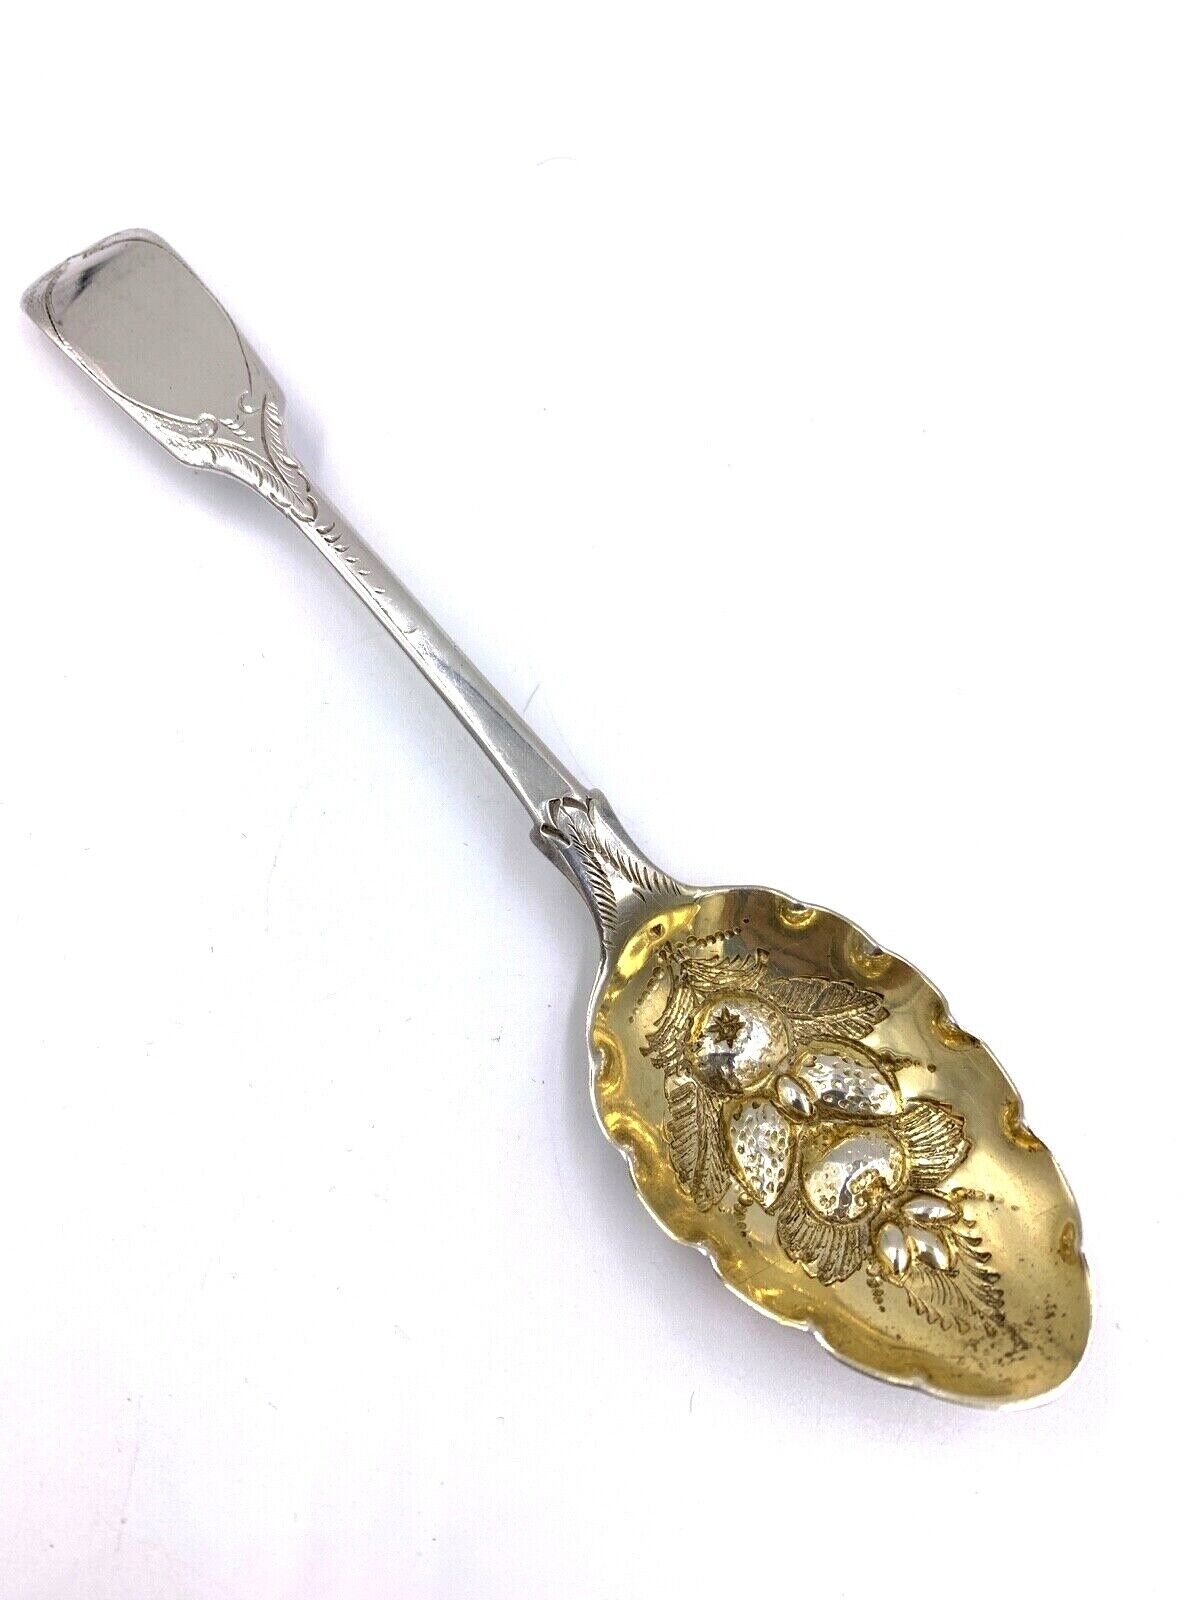 1866 Antique London Samuel Strahan Sterling Silver Berry Serving Spoon